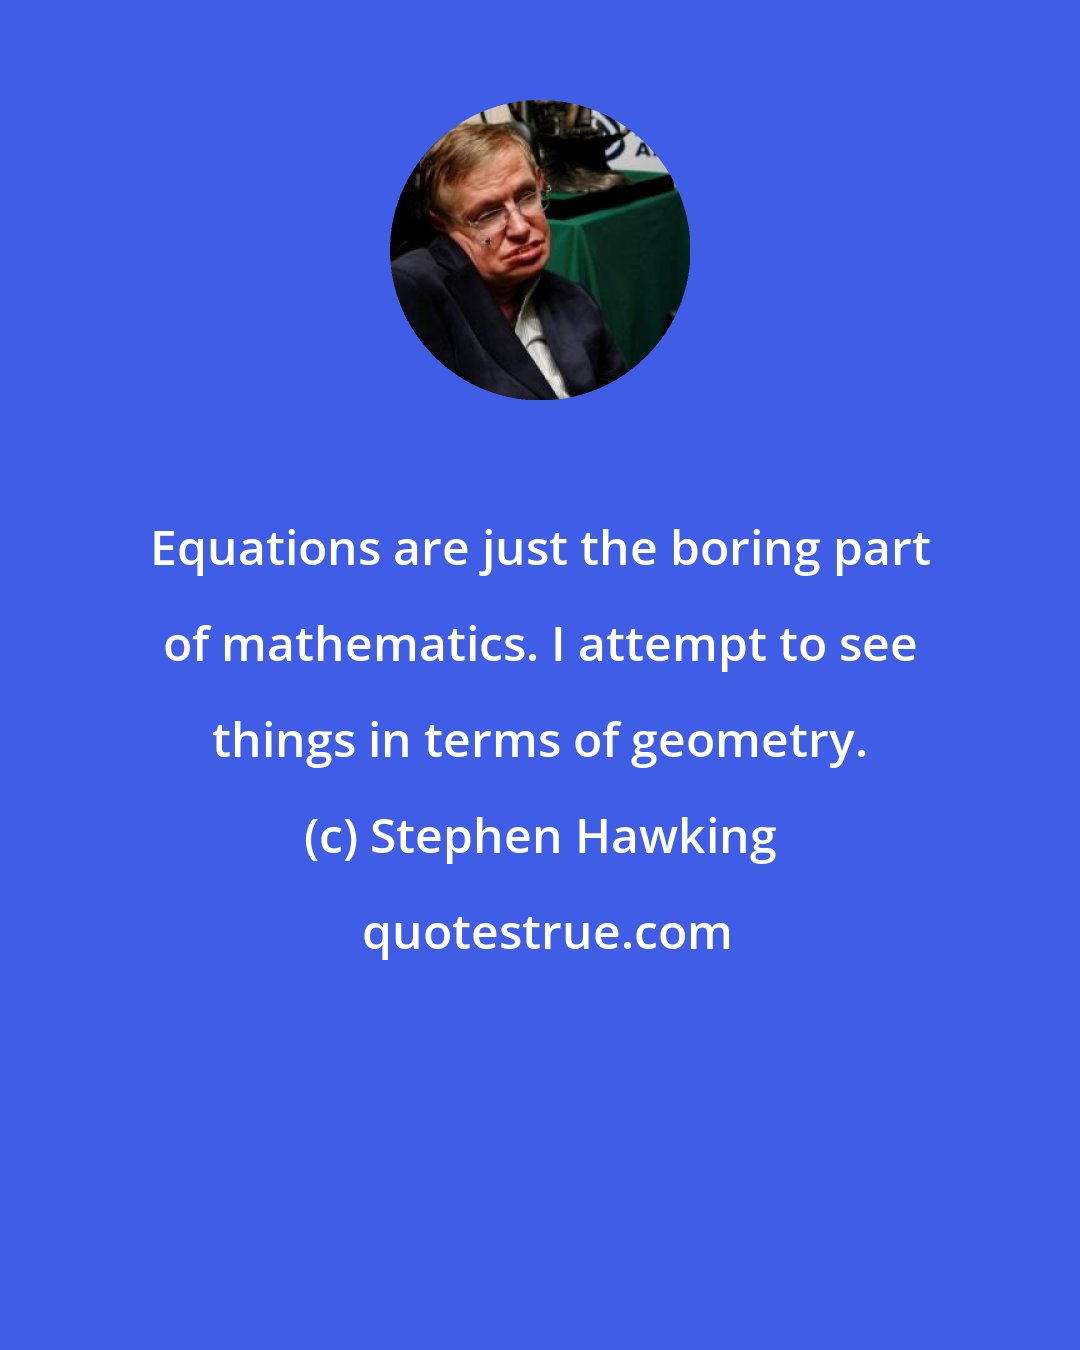 Stephen Hawking: Equations are just the boring part of mathematics. I attempt to see things in terms of geometry.